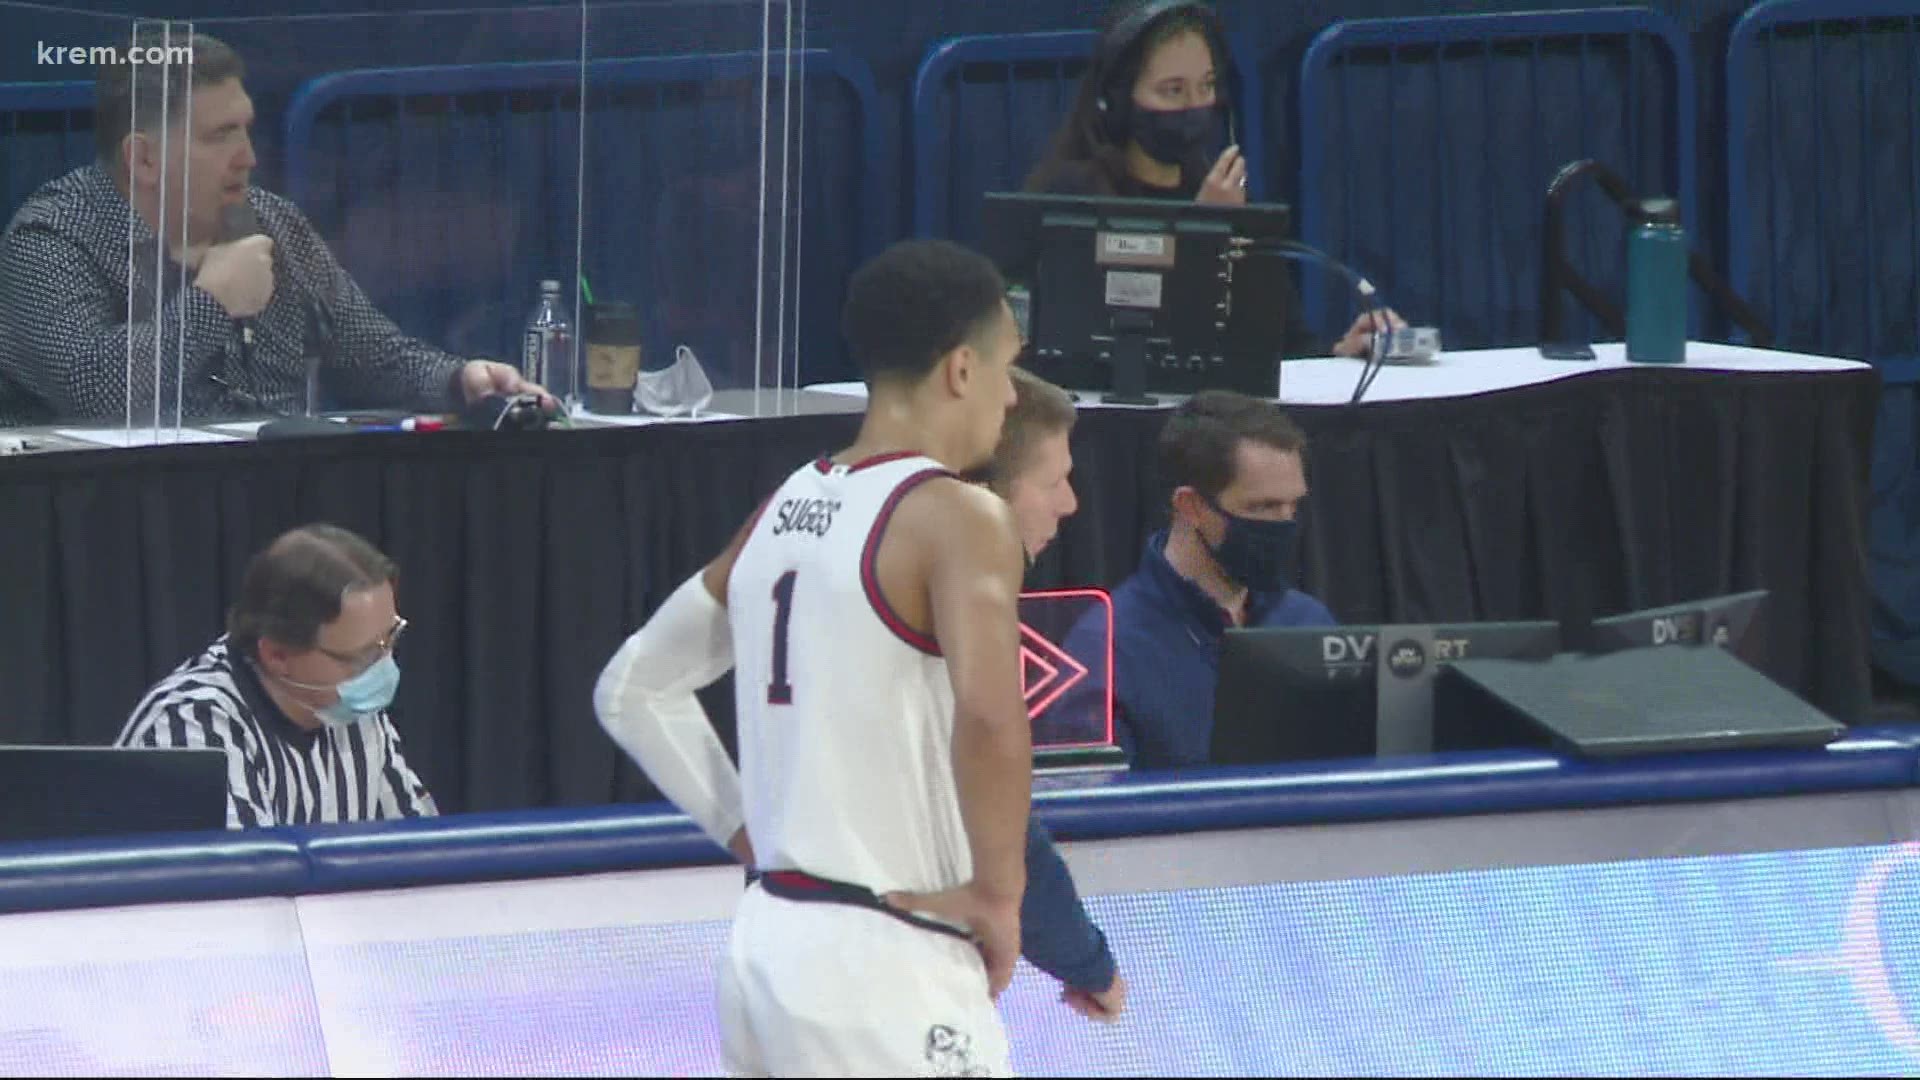 Gonzaga men's basketball guard Jalen Suggs announced via Twitter that he has declared for the NBA Draft. He is expected to be a top five pick.